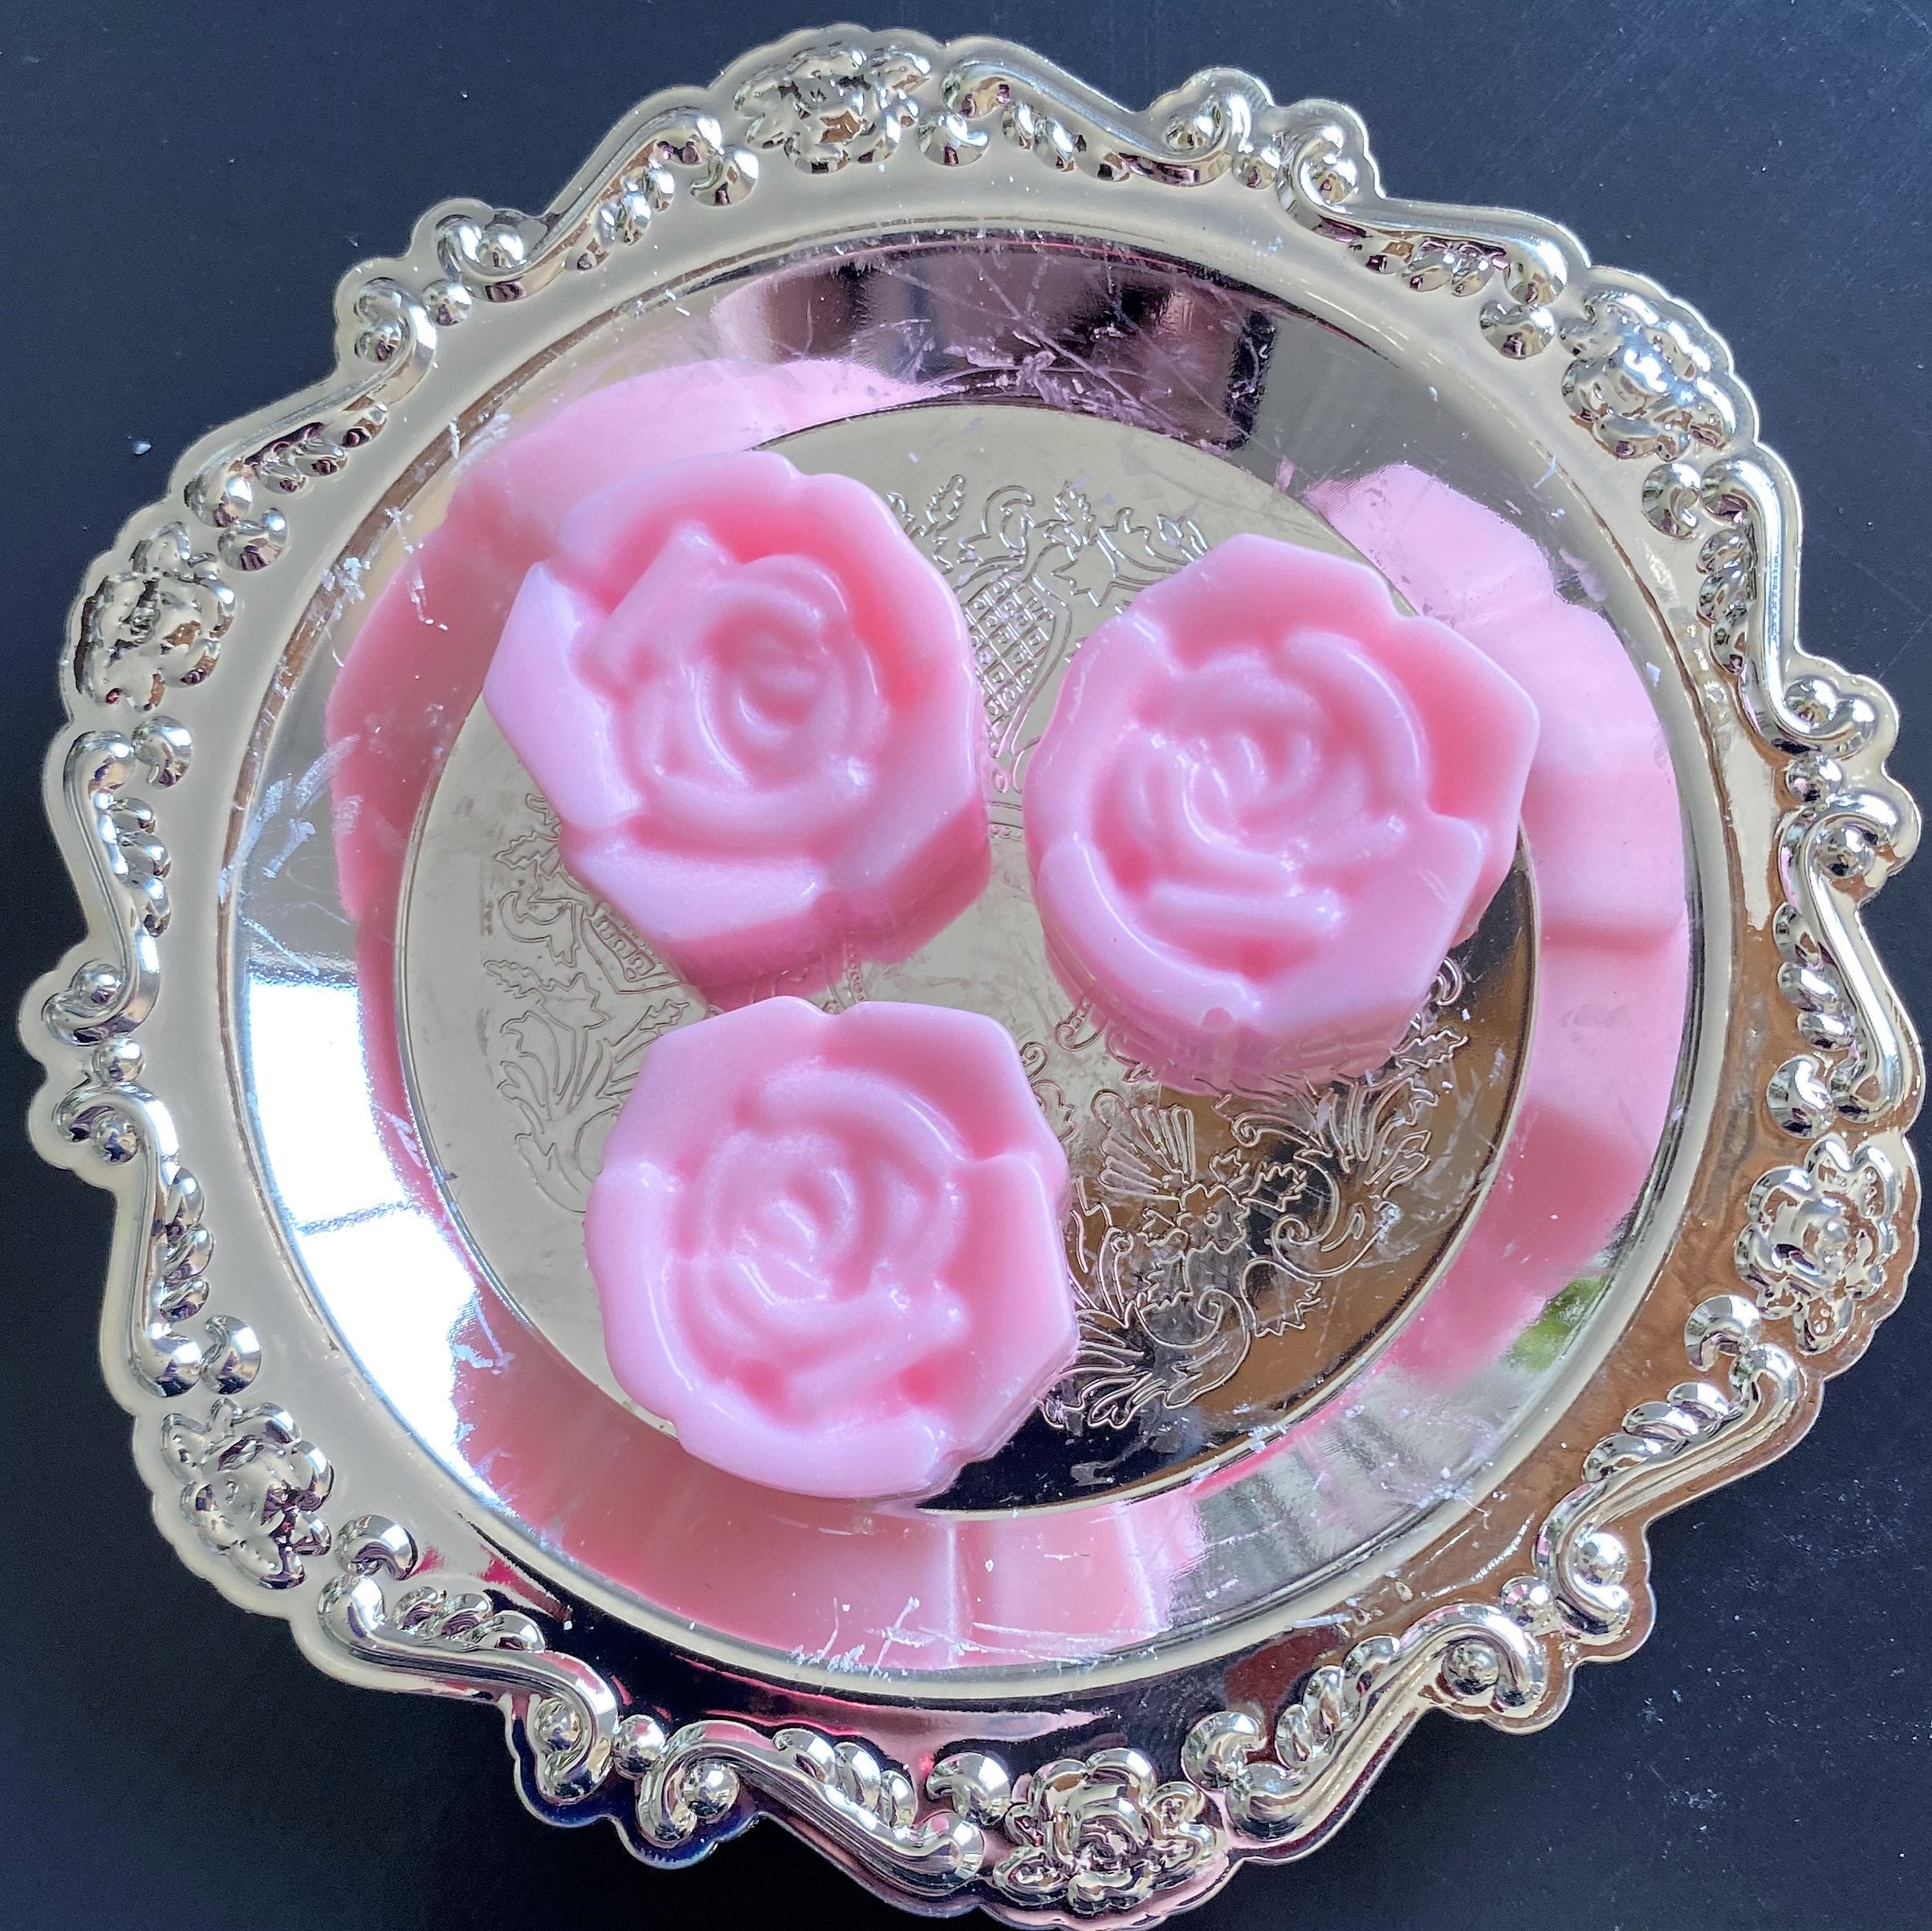 Rose Wax Melt Clamshell Hand Poured Soy Wax 